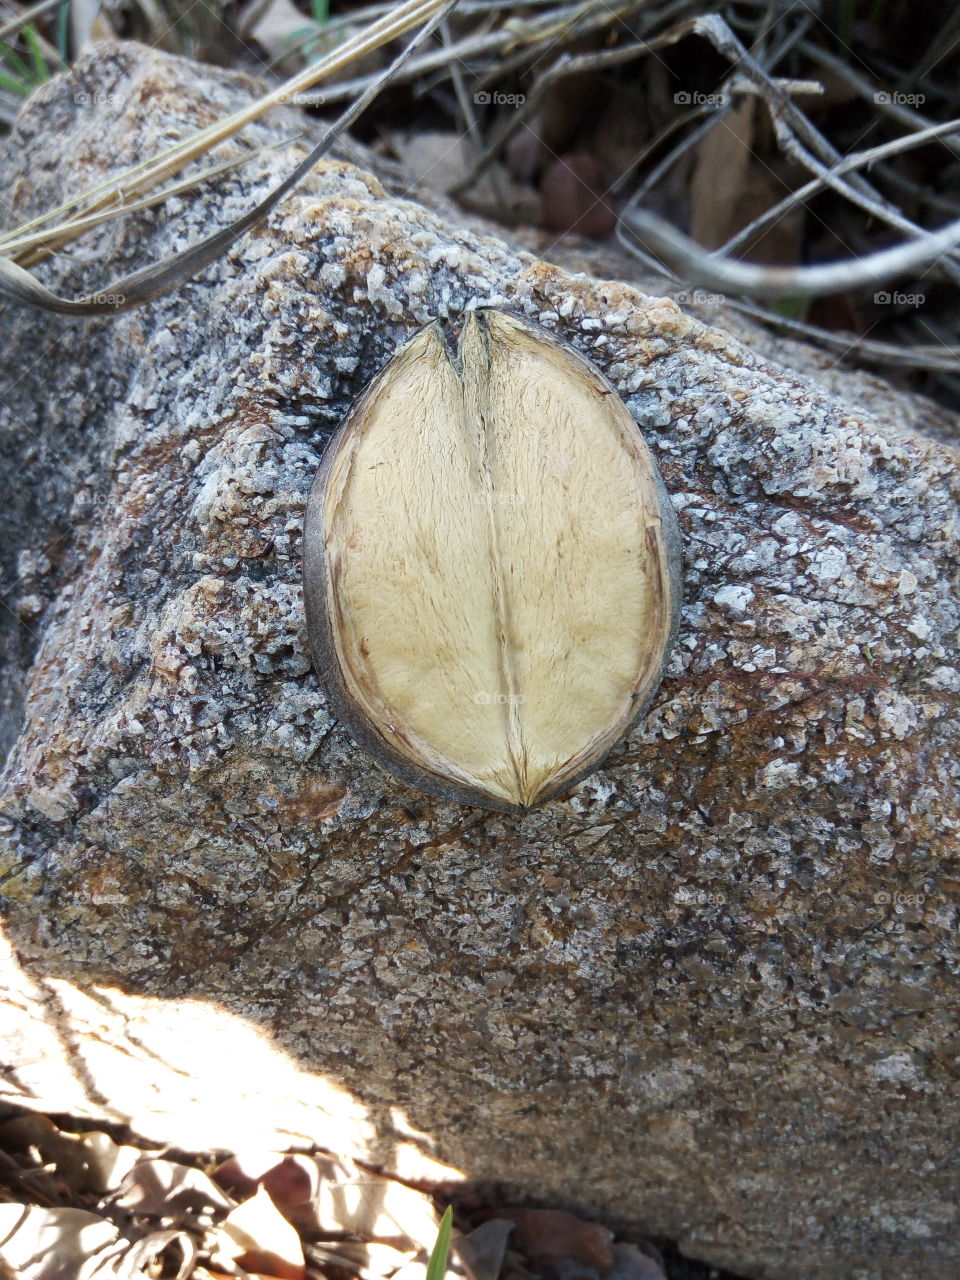 Tongue shaped wild fruit on a rock